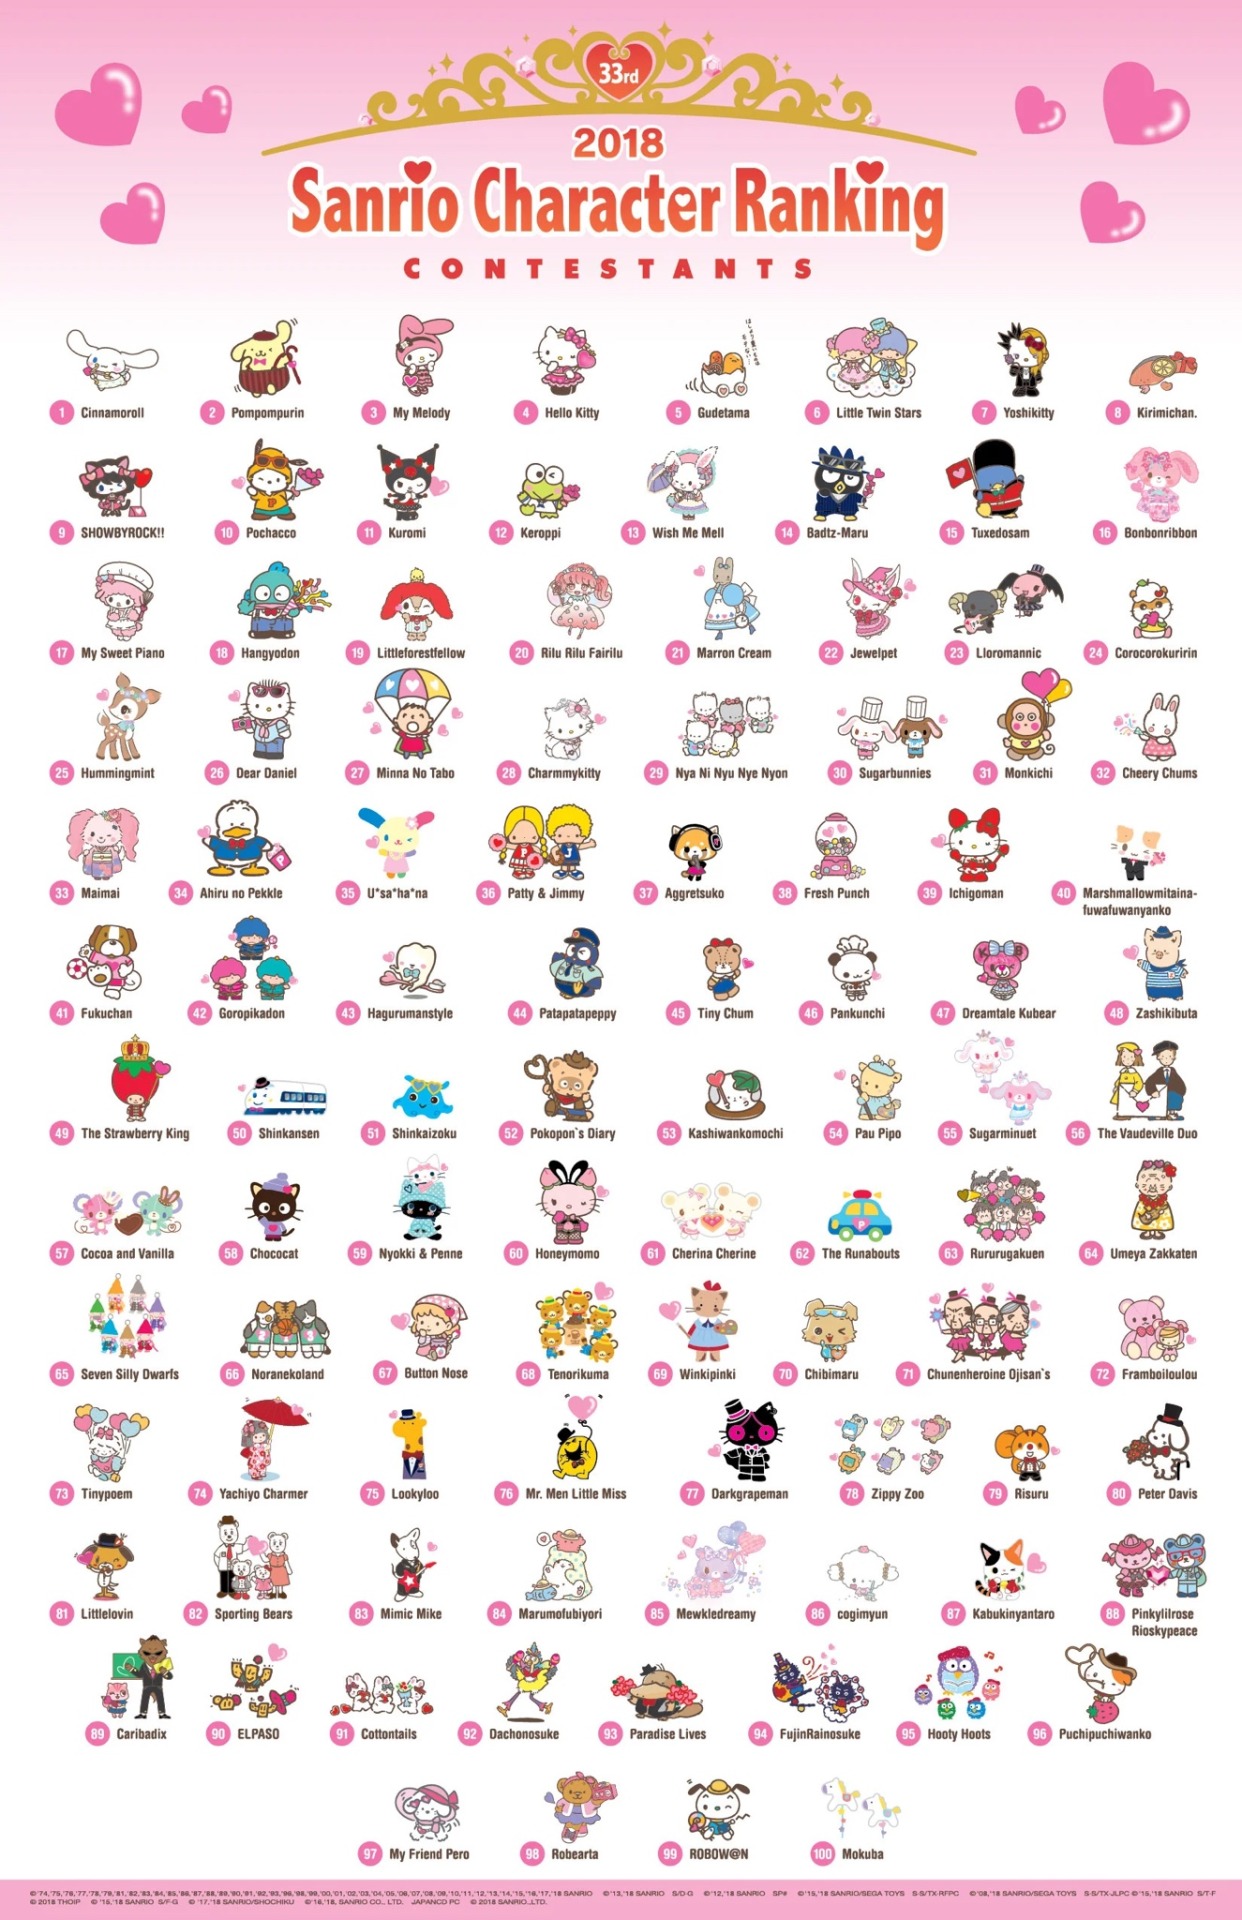 The 80 Chosen Sanrio Character Contestants In The 2021, 44 OFF